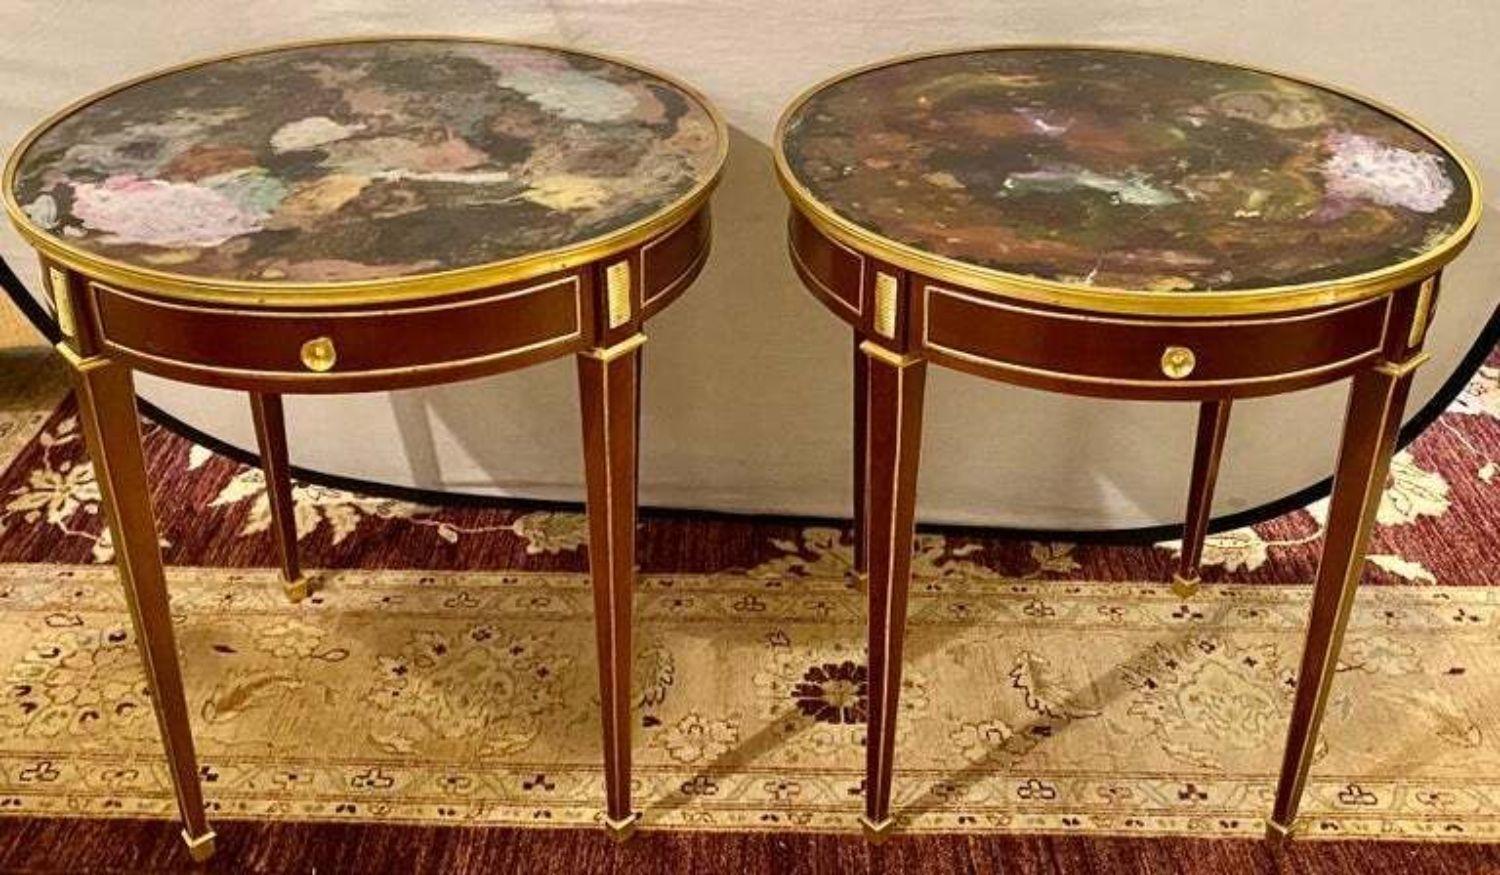 Pair of end, center or sofa tables bronze mounted single drawer multi-color glass tops in the manner of Maison Jansen. These finely crafted mahogany end table have tapering brass framed sleek legs supporting a bronze galleried multi colored glass